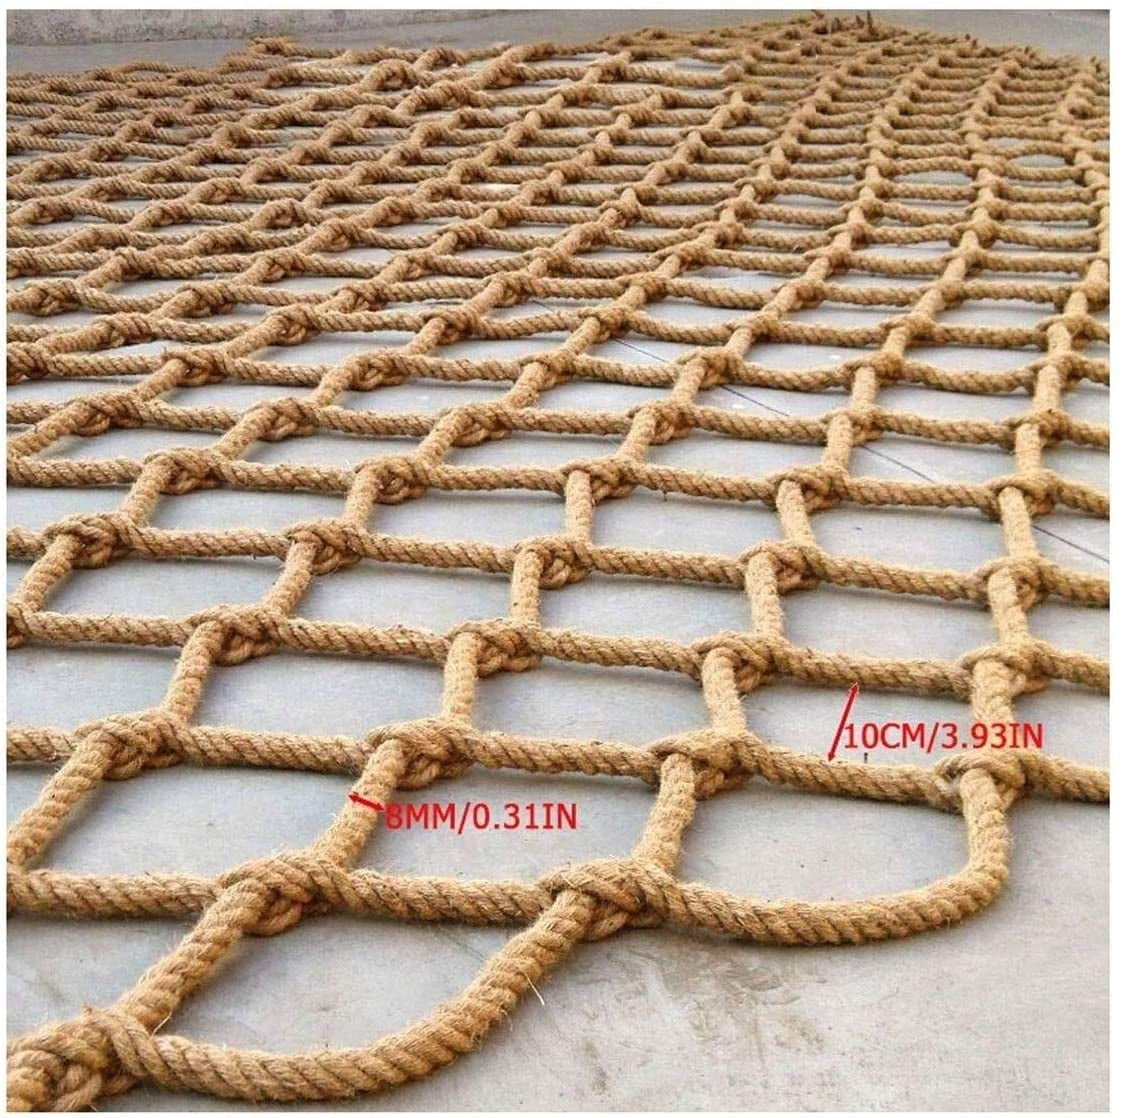 Rope Net for Birds Child Protection Safety Net Treehouse Climbing Netting Hemp Rope Net Grid Playground Swing Climbing Net for Kids 